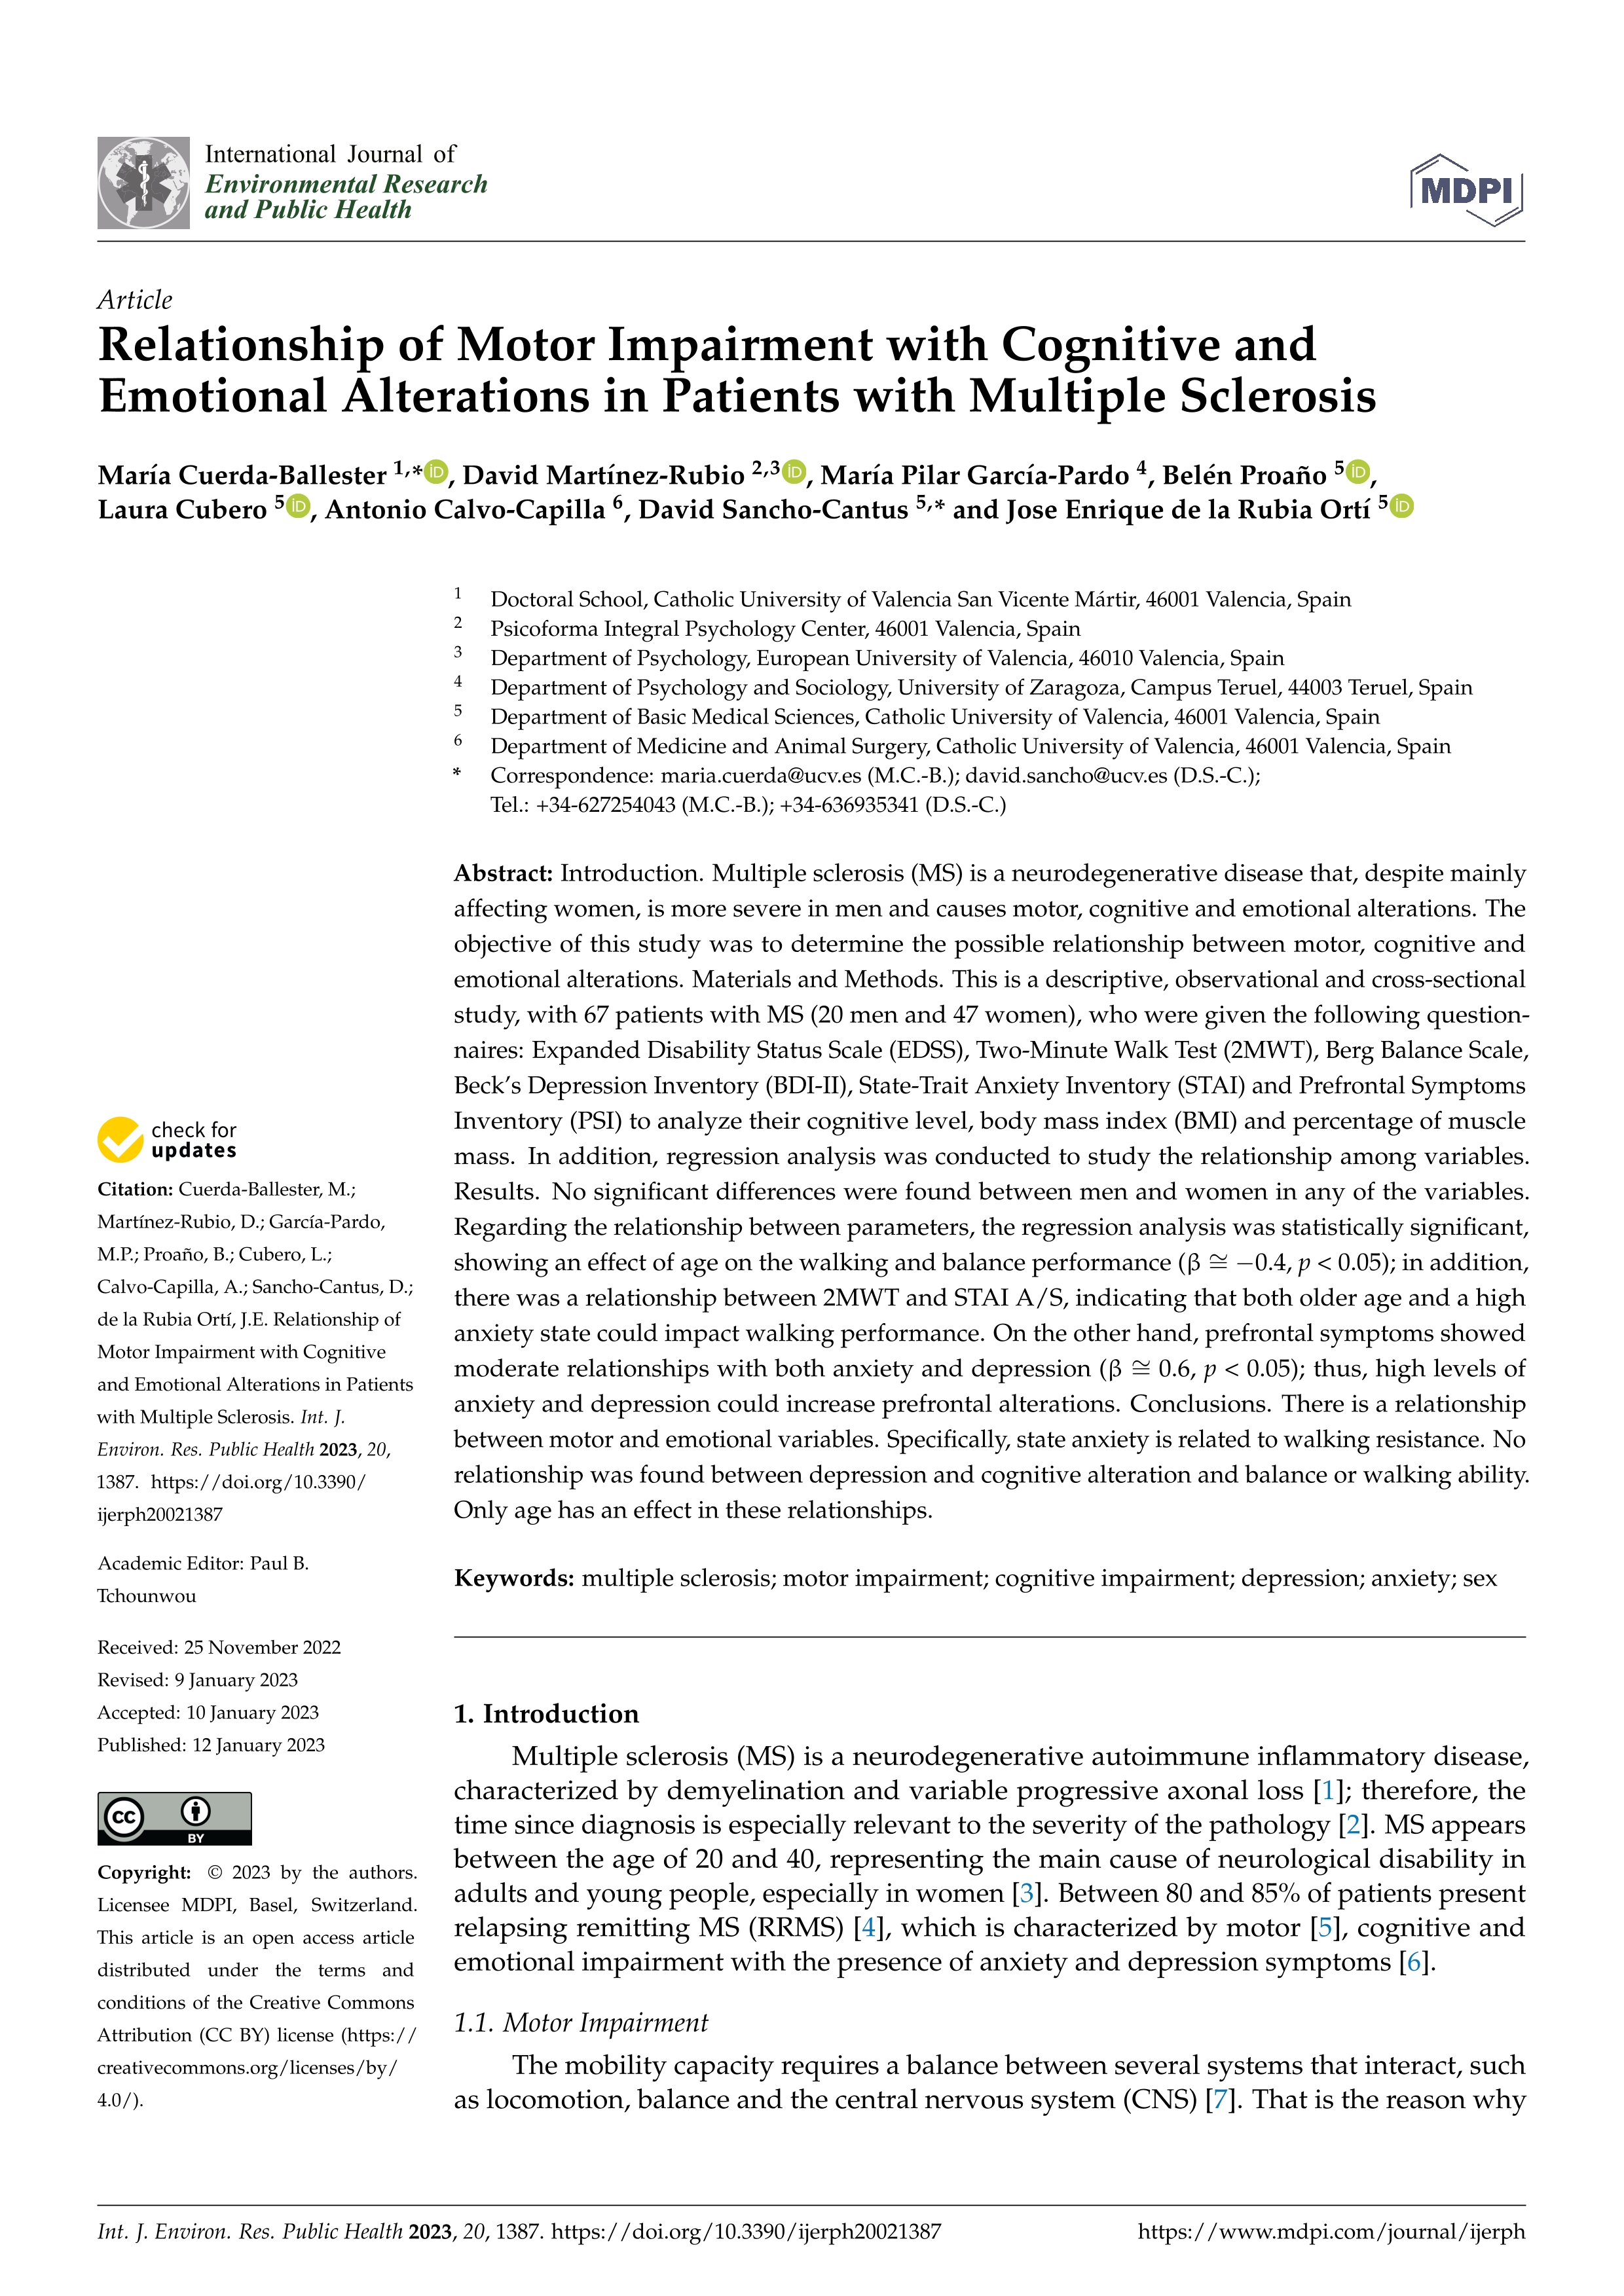 Relationship of motor impairment with cognitive and emotional alterations in patients with multiple sclerosis